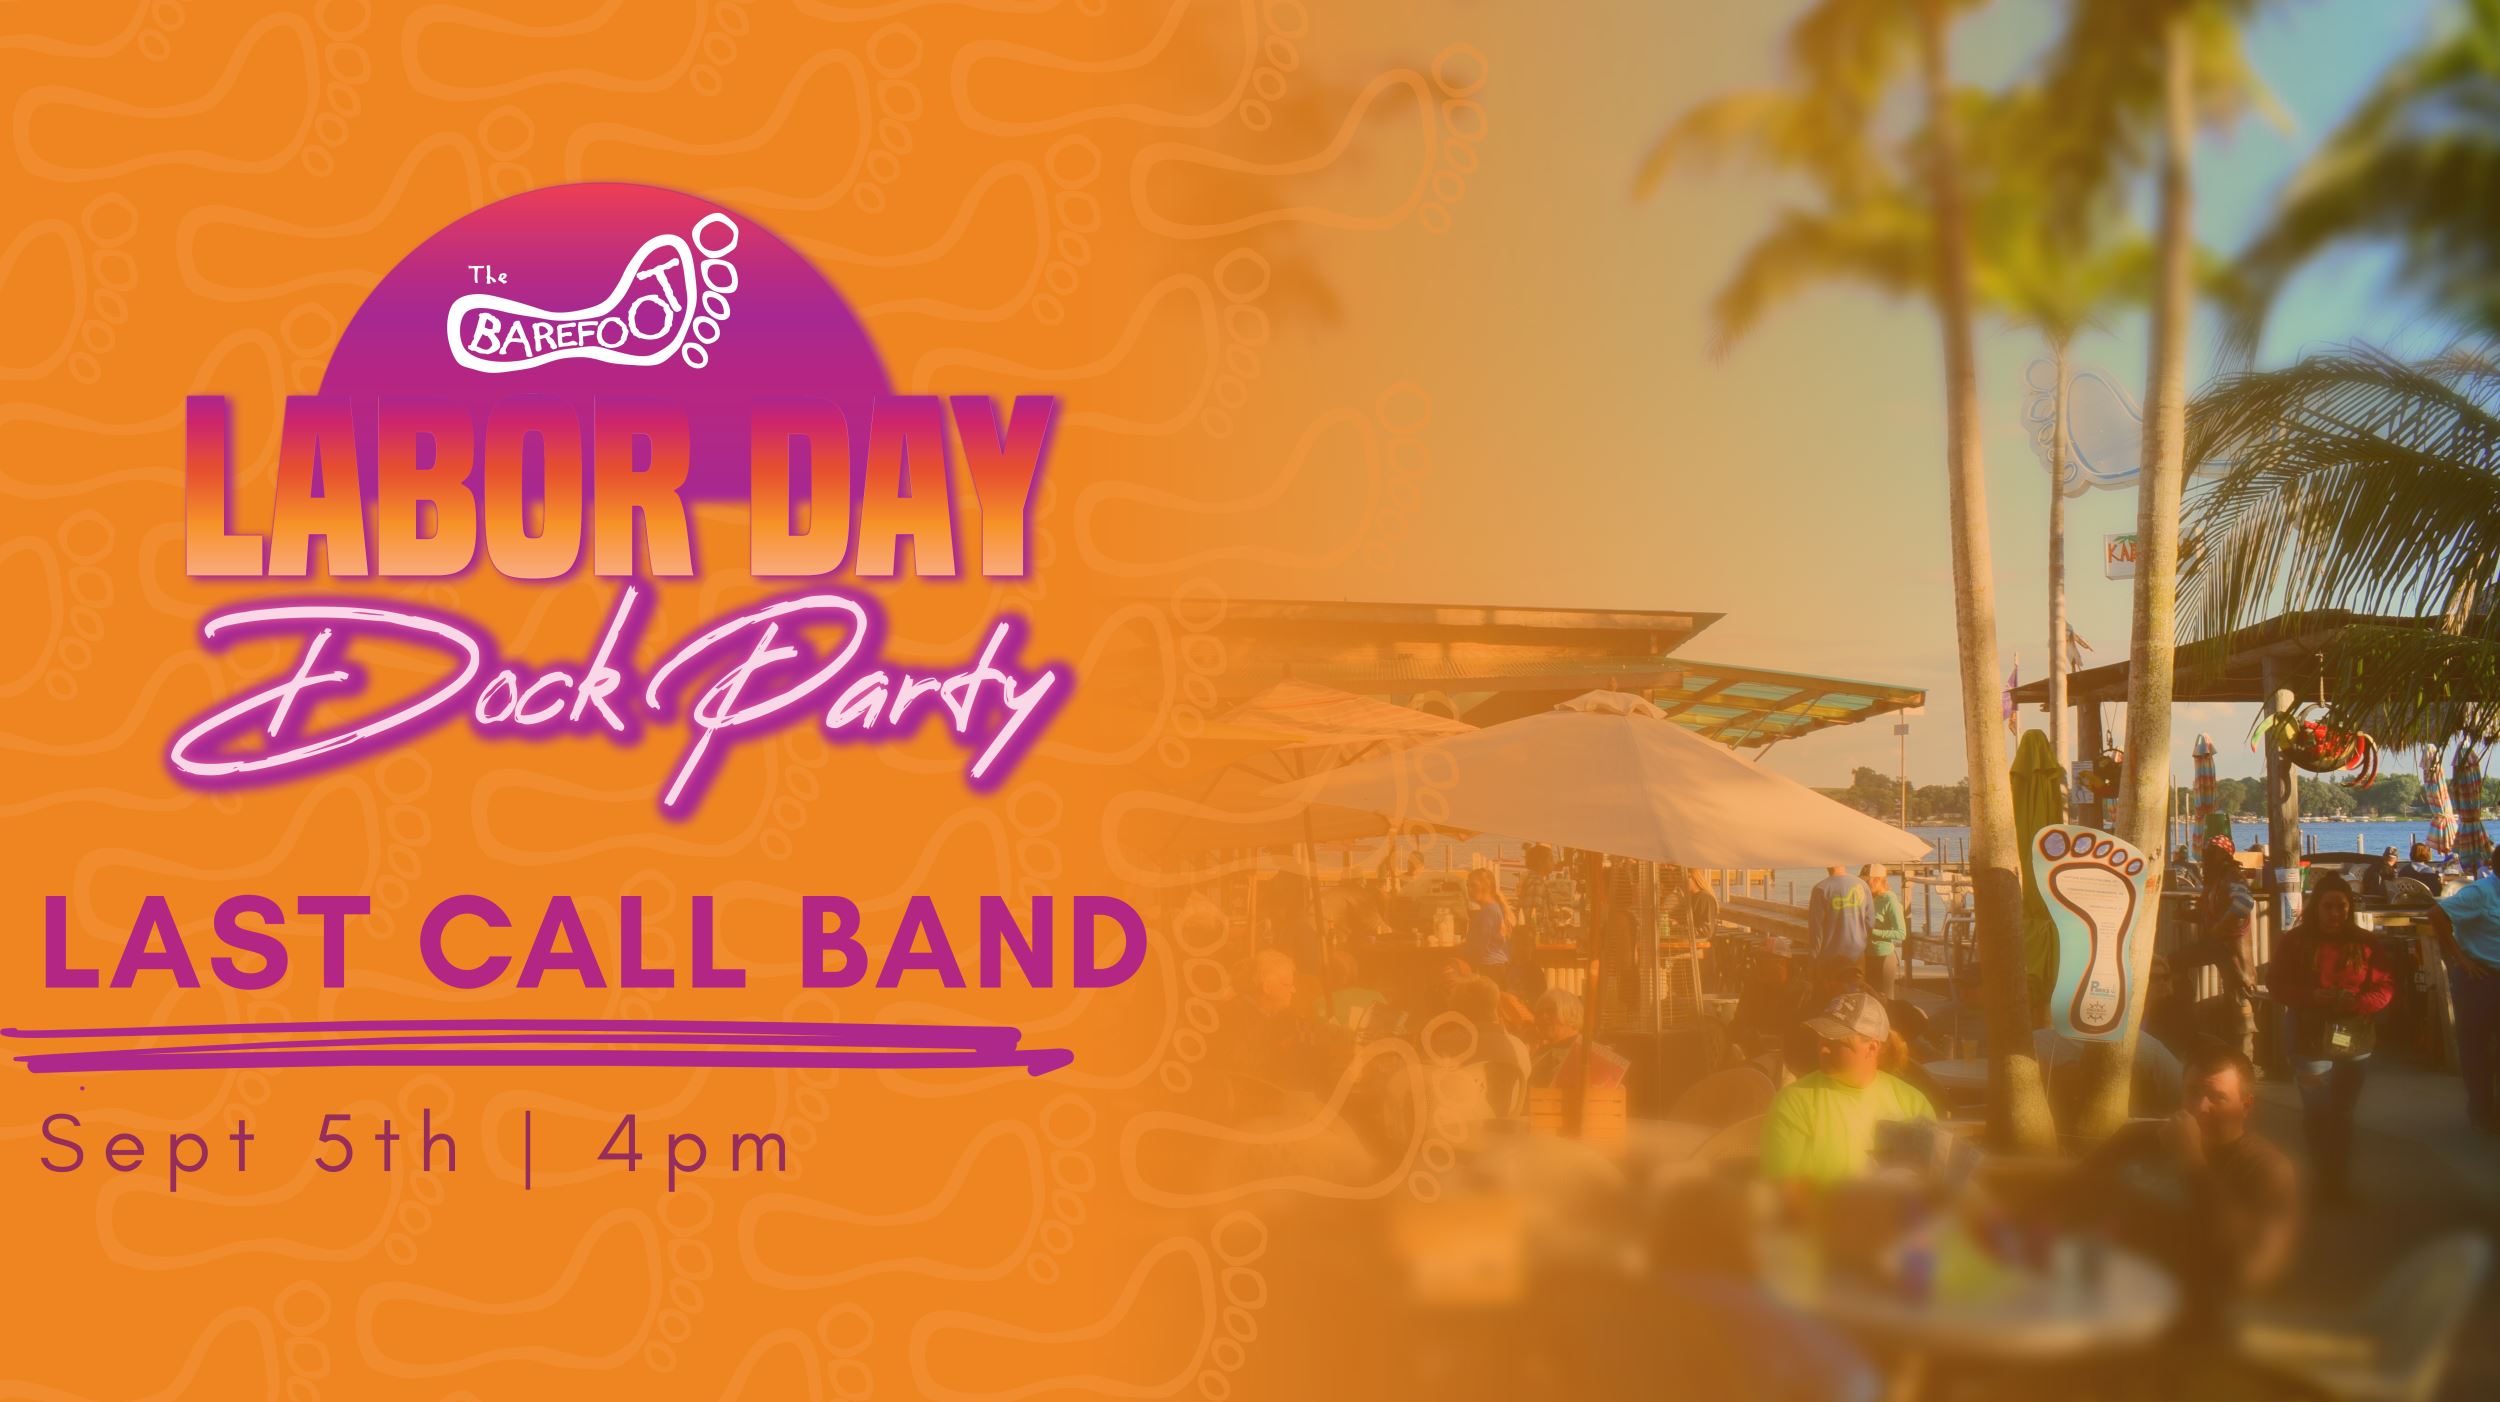 Labor Day Dock Party with The Last Call Band